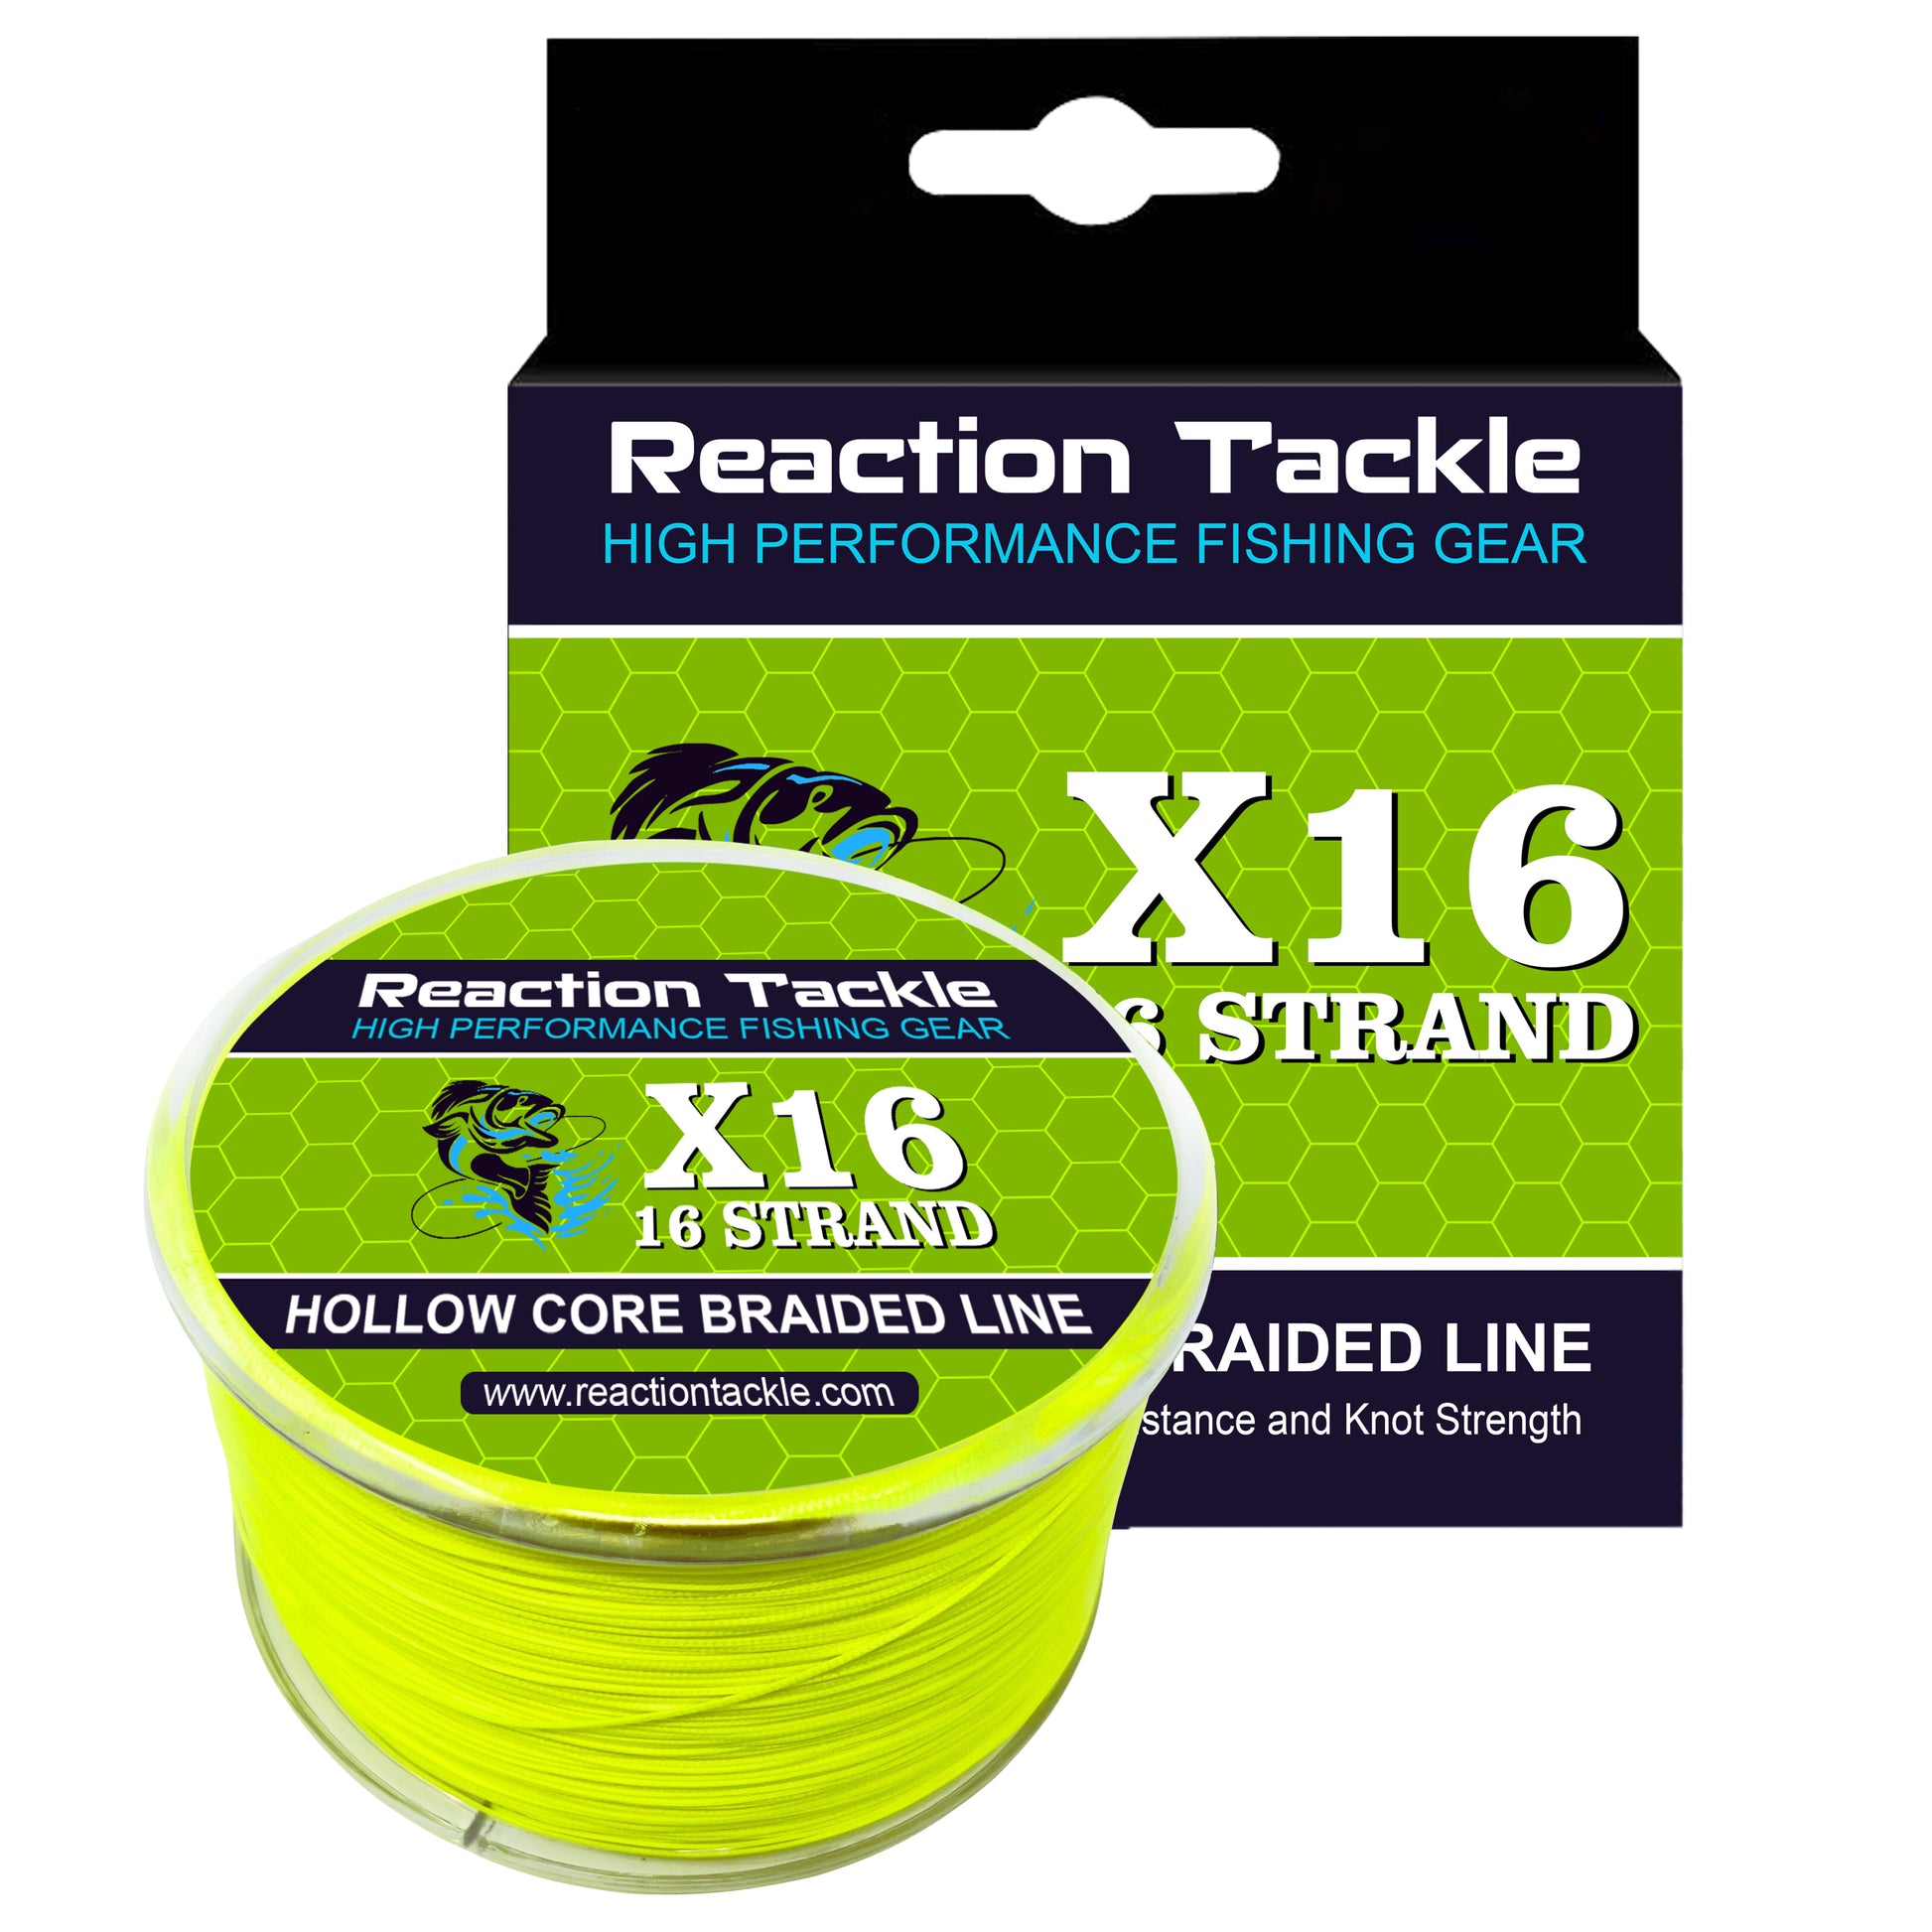 PowerPro Braided Fishing Line Review by Ocean State Tackle RI